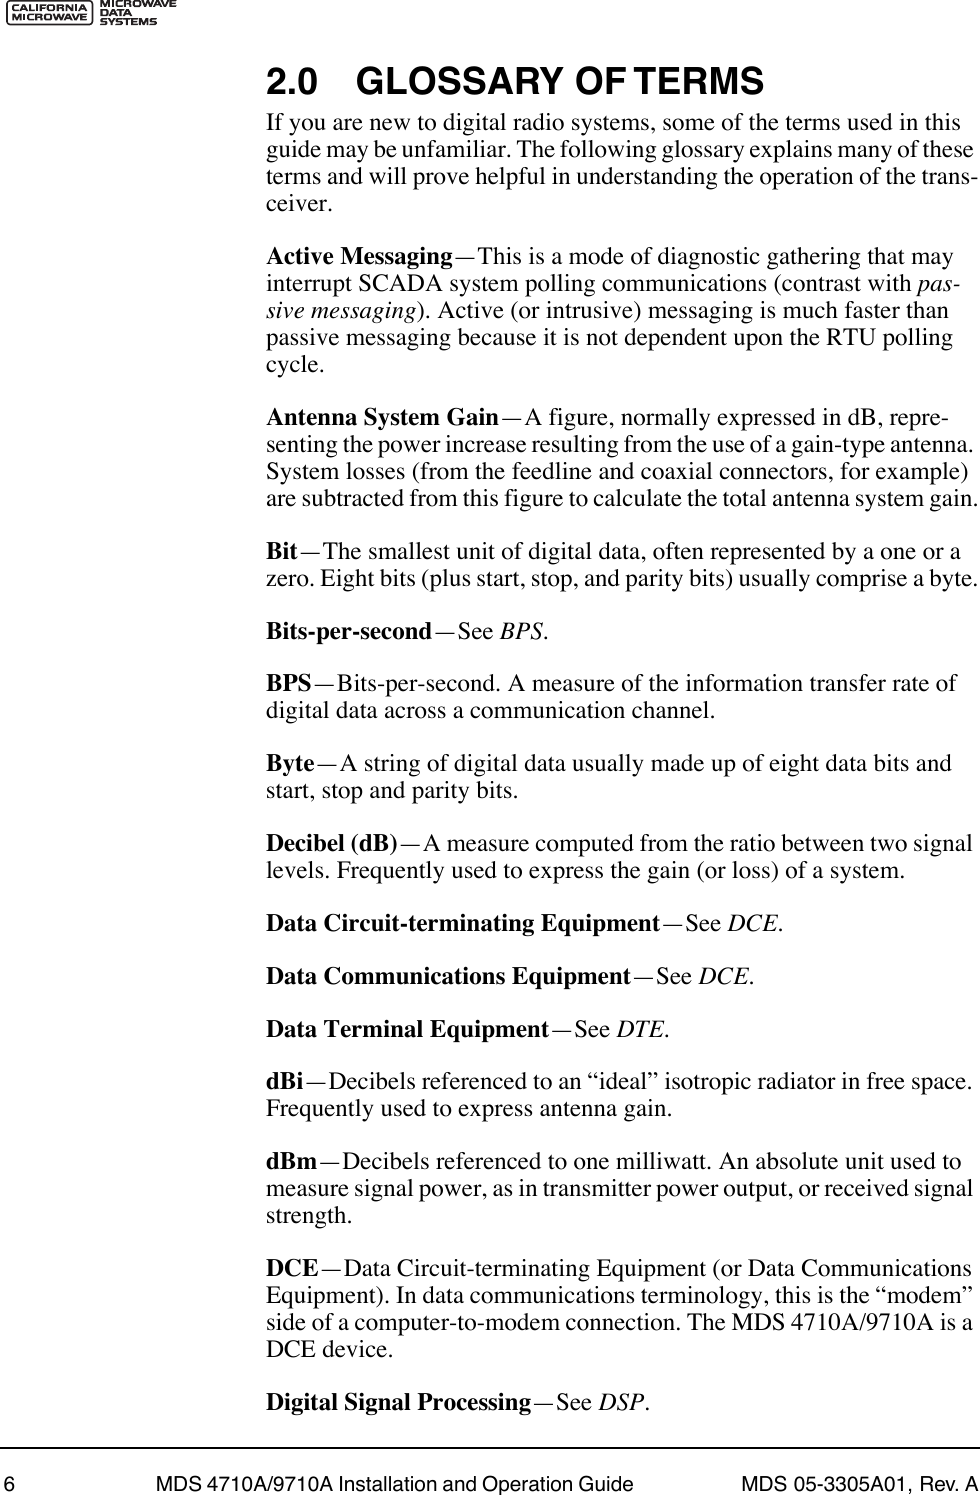  6 MDS 4710A/9710A Installation and Operation Guide  MDS 05-3305A01, Rev. A 2.0 GLOSSARY OF TERMS If you are new to digital radio systems, some of the terms used in this guide may be unfamiliar. The following glossary explains many of these terms and will prove helpful in understanding the operation of the trans-ceiver. Active Messaging ÑThis is a mode of diagnostic gathering that may interrupt SCADA system polling communications (contrast with  pas-sive messaging ). Active (or intrusive) messaging is much faster than passive messaging because it is not dependent upon the RTU polling cycle. Antenna System Gain ÑA figure, normally expressed in dB, repre-senting the power increase resulting from the use of a gain-type antenna. System losses (from the feedline and coaxial connectors, for example) are subtracted from this figure to calculate the total antenna system gain. Bit ÑThe smallest unit of digital data, often represented by a one or a zero. Eight bits (plus start, stop, and parity bits) usually comprise a byte. Bits-per-second ÑSee  BPS . BPS ÑBits-per-second. A measure of the information transfer rate of digital data across a communication channel. Byte ÑA string of digital data usually made up of eight data bits and start, stop and parity bits. Decibel (dB) ÑA measure computed from the ratio between two signal levels. Frequently used to express the gain (or loss) of a system. Data Circuit-terminating Equipment ÑSee  DCE . Data Communications Equipment ÑSee  DCE . Data Terminal Equipment ÑSee  DTE . dBi ÑDecibels referenced to an ÒidealÓ isotropic radiator in free space. Frequently used to express antenna gain. dBm ÑDecibels referenced to one milliwatt. An absolute unit used to measure signal power, as in transmitter power output, or received signal strength. DCE ÑData Circuit-terminating Equipment (or Data Communications Equipment). In data communications terminology, this is the ÒmodemÓ side of a computer-to-modem connection. The MDS 4710A/9710A is a DCE device. Digital Signal Processing ÑSee  DSP .